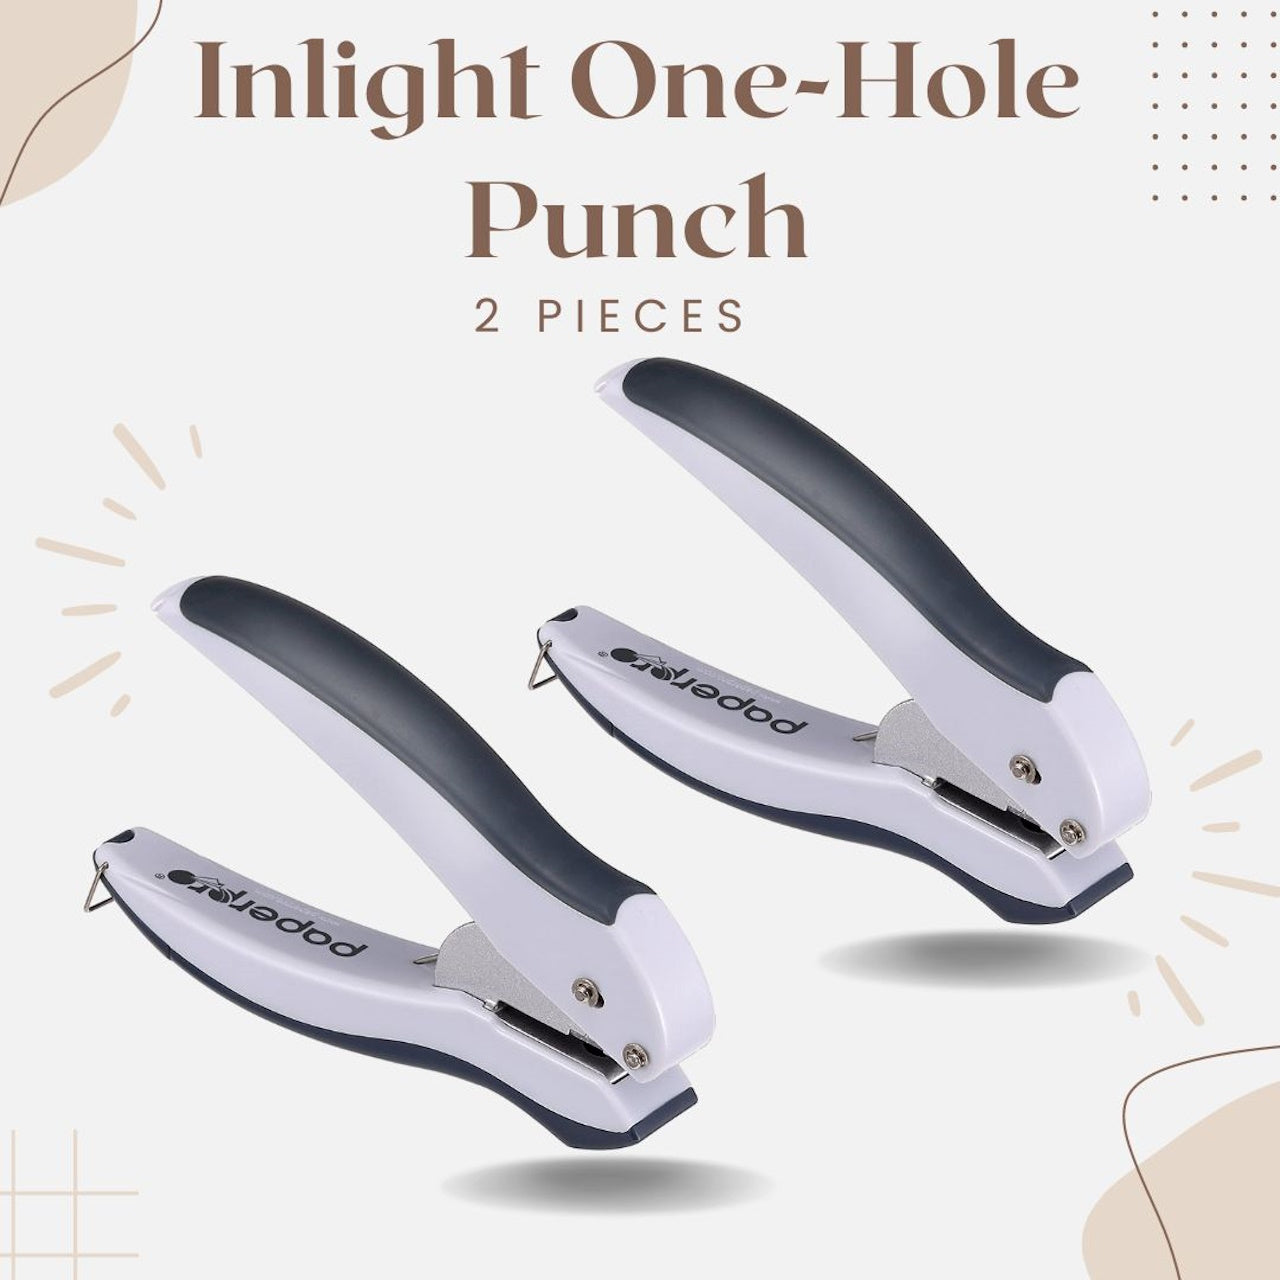 Bostitch Office EZ Squeeze One-Hole Punch, 10 Sheet Capacity, Lightweight, Gray, Jam-free - 2 Pack